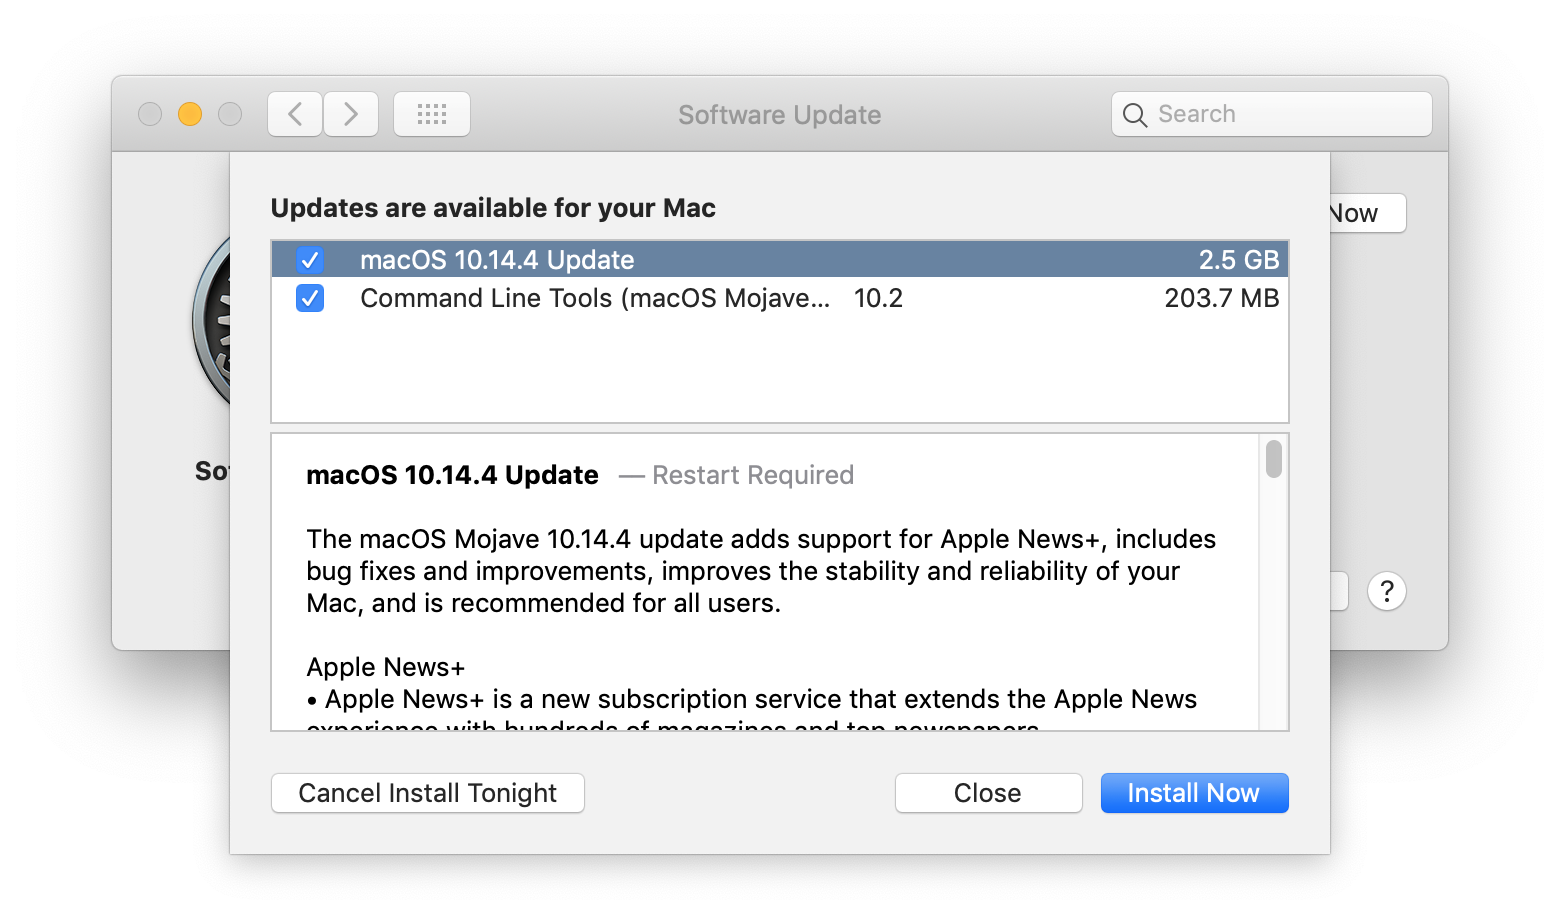 Screenshot of the software update release notes in System Preferences in MacOS 10.14.